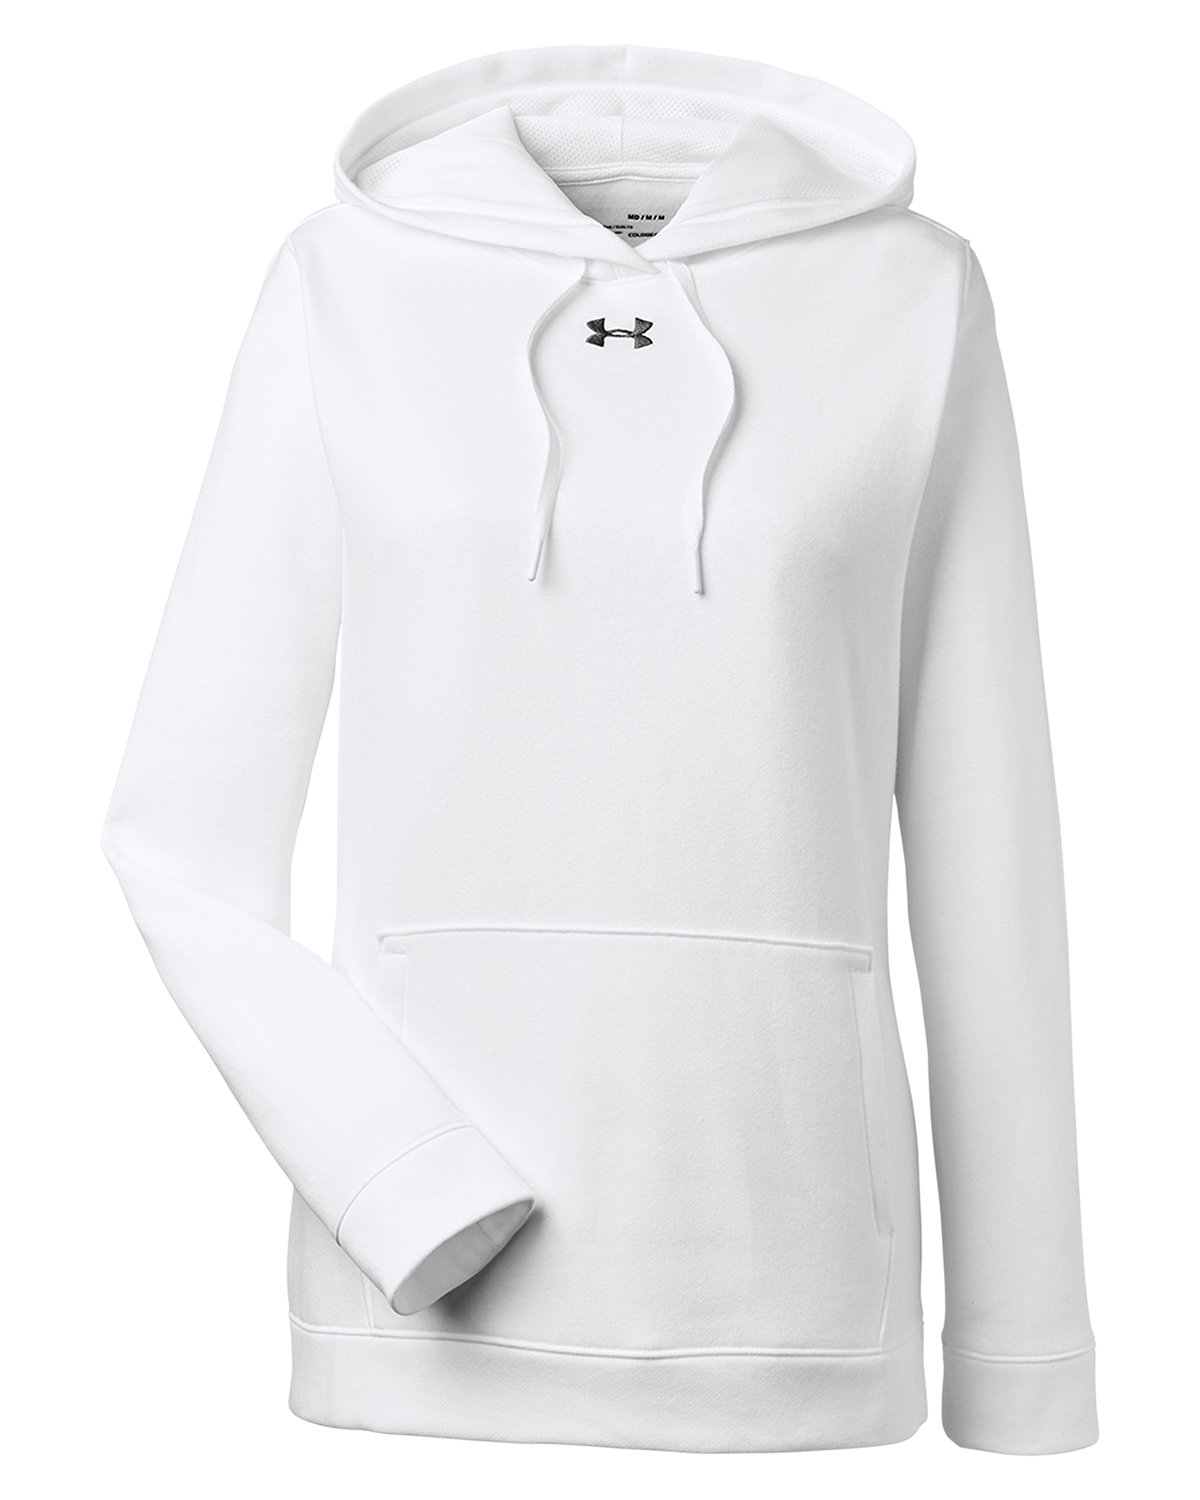 Picture of Under Armour Women's Hustle Pullover Hooded Sweatshirt